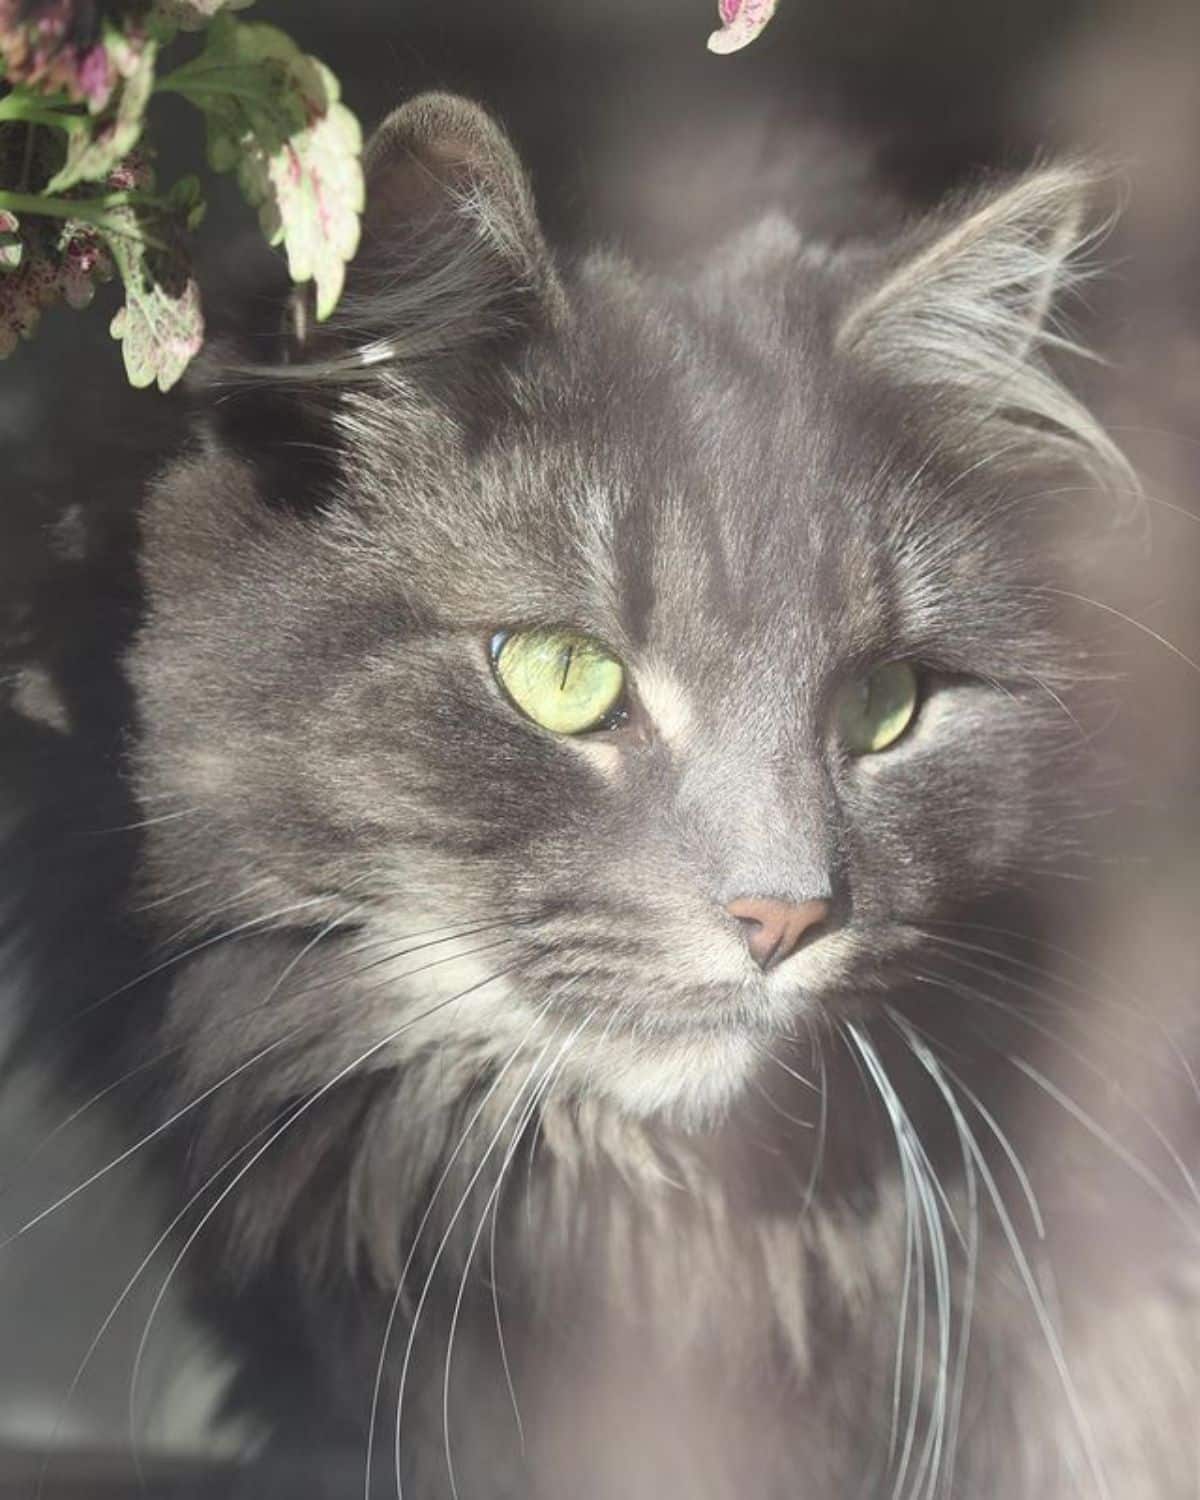 A close-up of a gray maine coon head with green eyes.